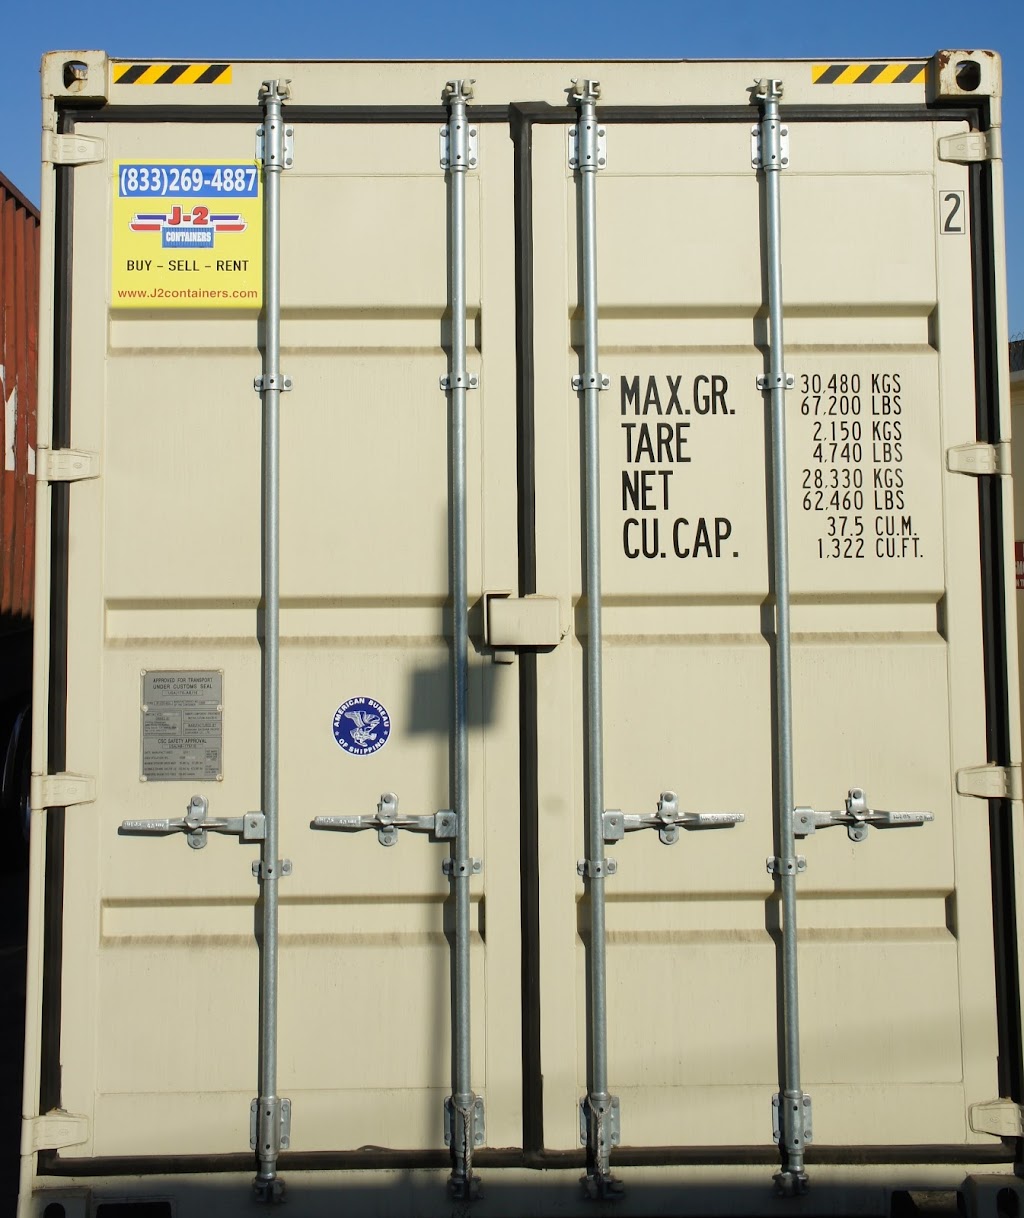 J-2 Containers & Storage | 1008 Vreeland Ave, Wilmington, CA 90744, USA | Phone: (833) 269-4887